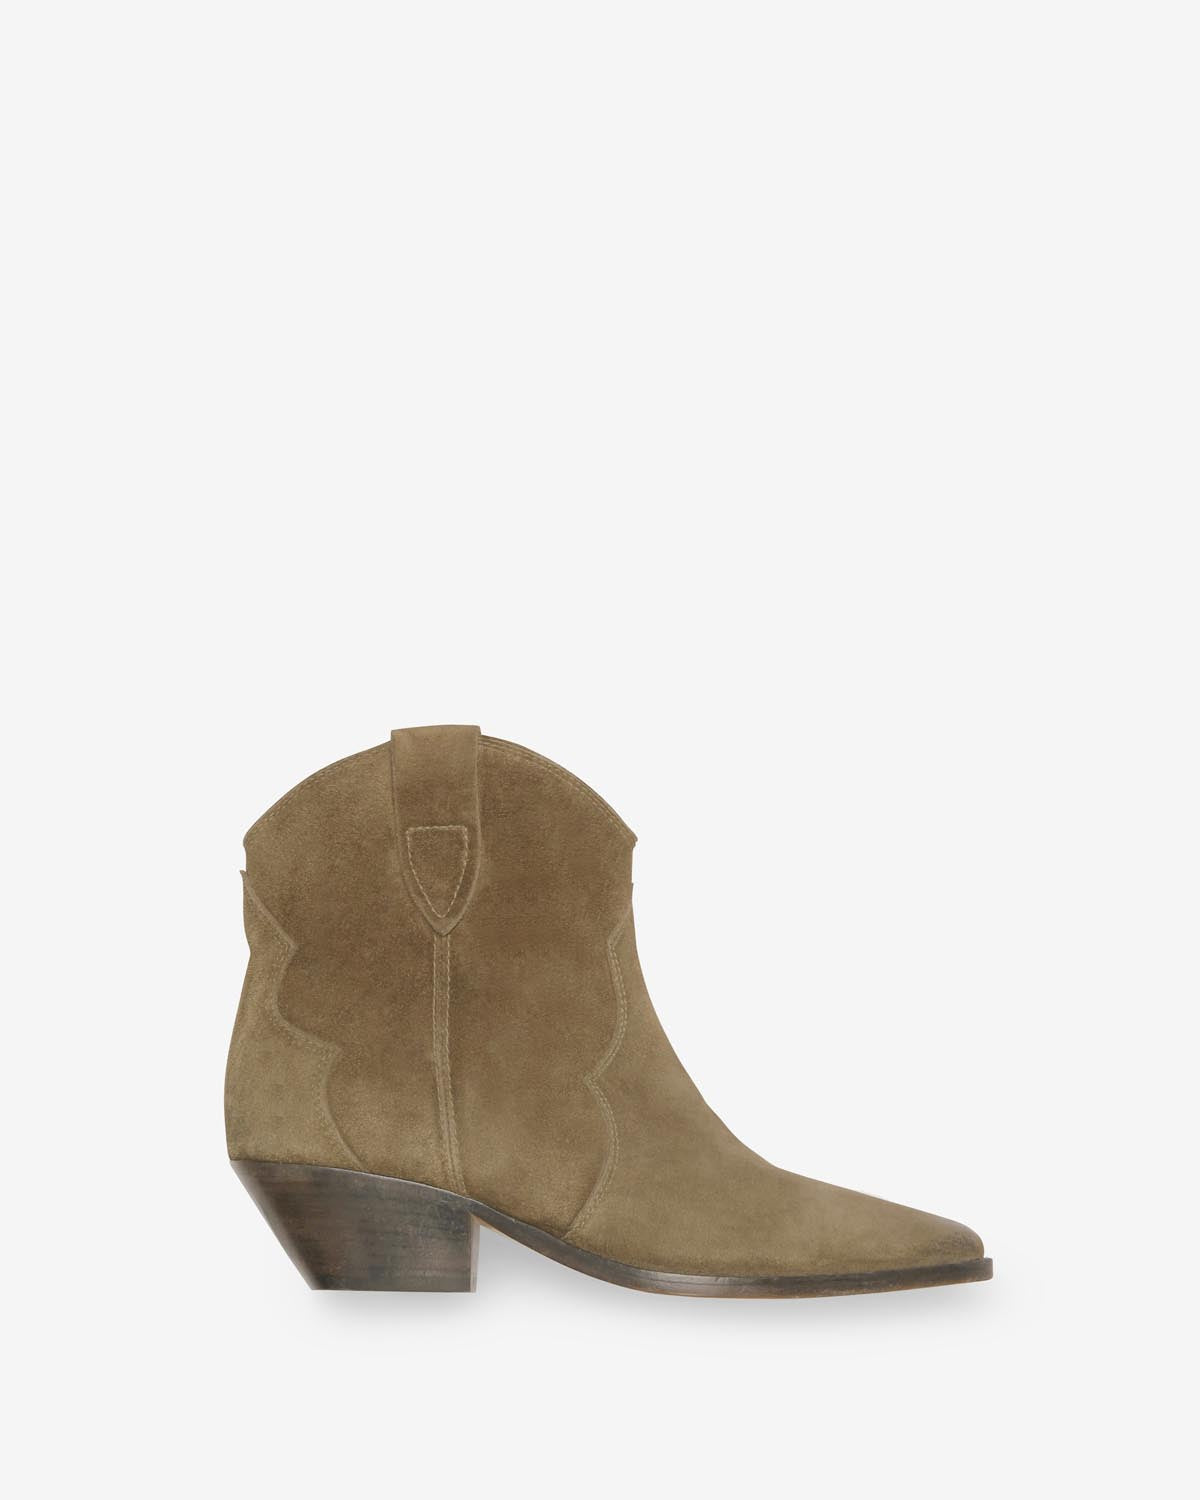 Dewina cowboy boots Woman Taupe 5